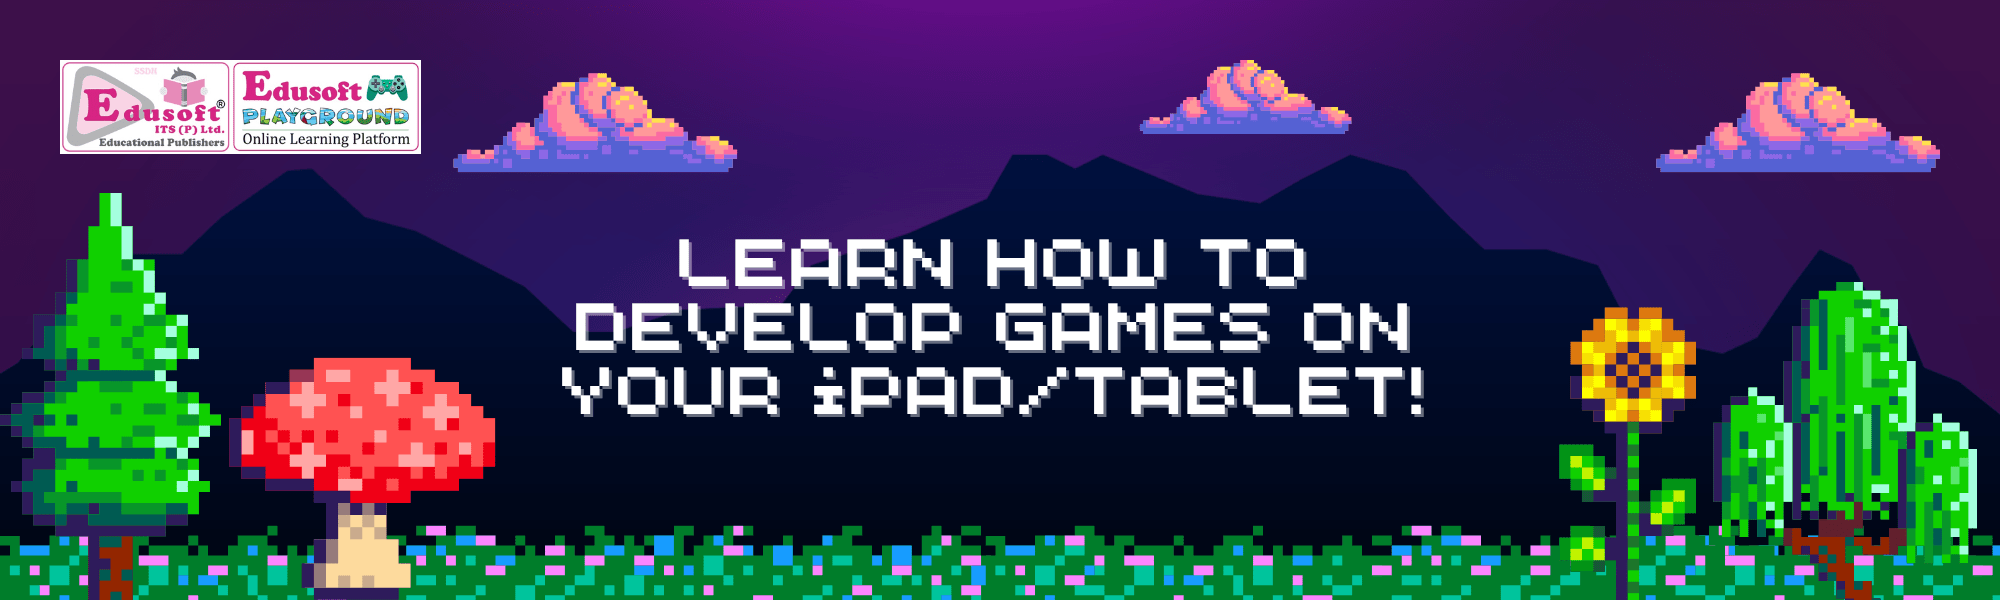 Game Development on iPad or Tablet - Unleash Your Creativity